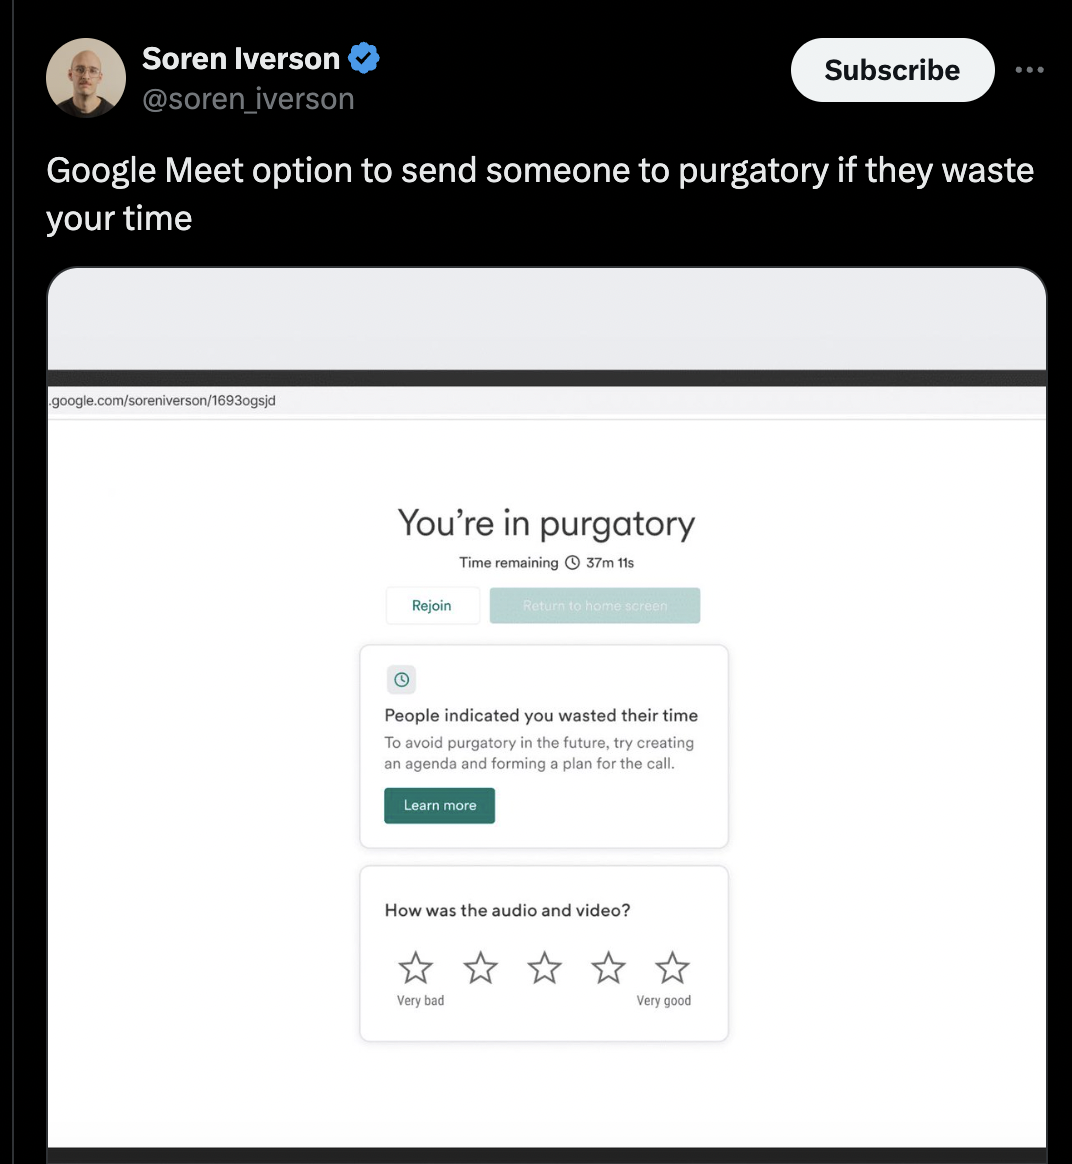 screenshot - Soren Iverson iverson Subscribe Google Meet option to send someone to purgatory if they waste your time google.comconversion1893 You're in purgatory Rajan Time remaining 37m the People indicated you wasted their time To avoid purgatory in the